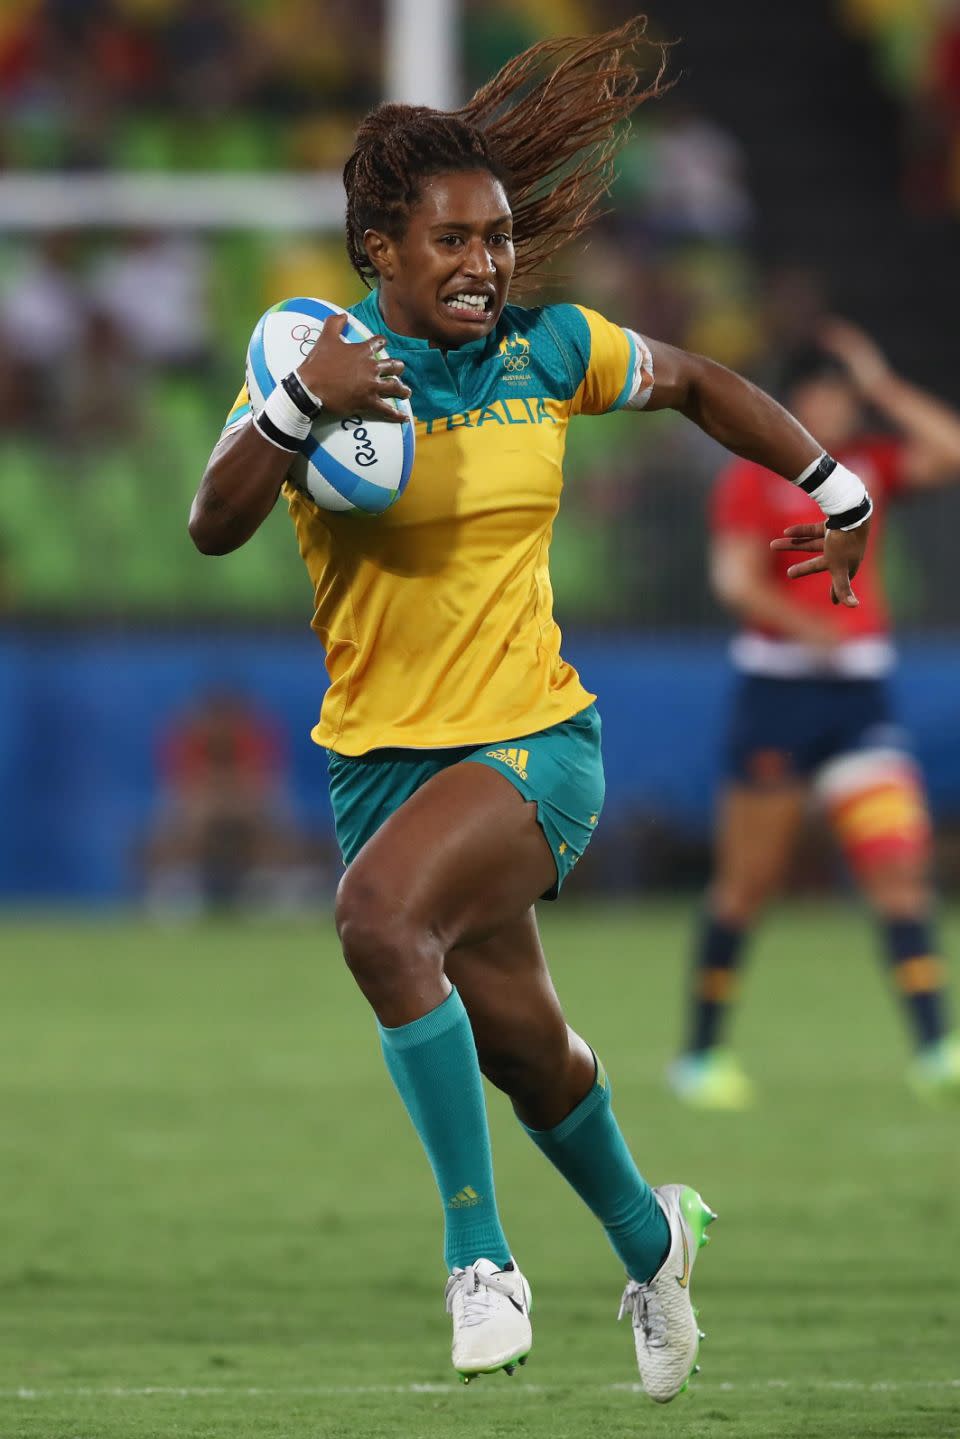 Former sprinter turned rugby star Ellia is now gearing up for the Commonwealth Games. Photo: Getty